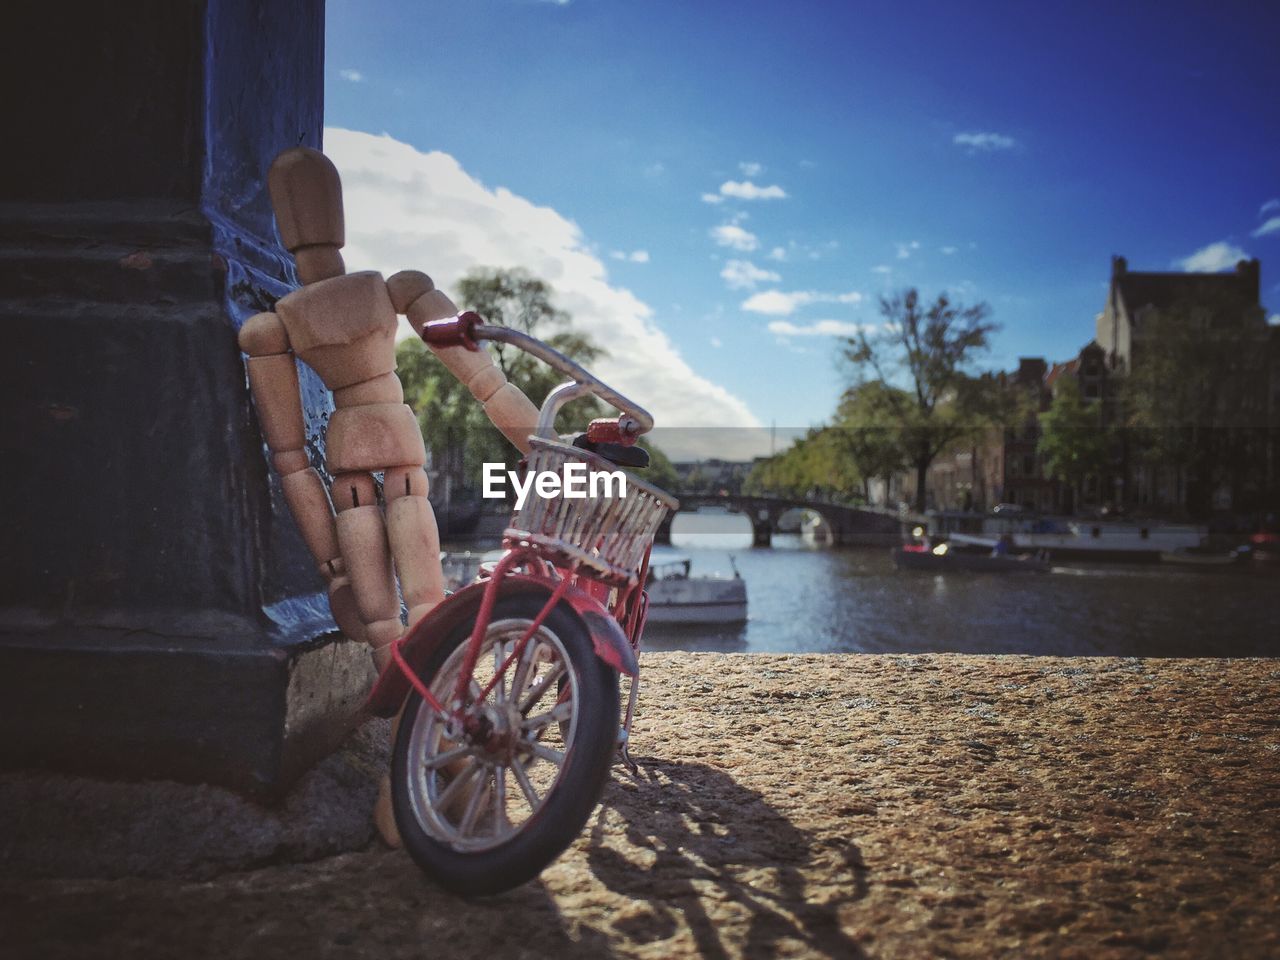 Figurine and toy bicycle by river against sky in city